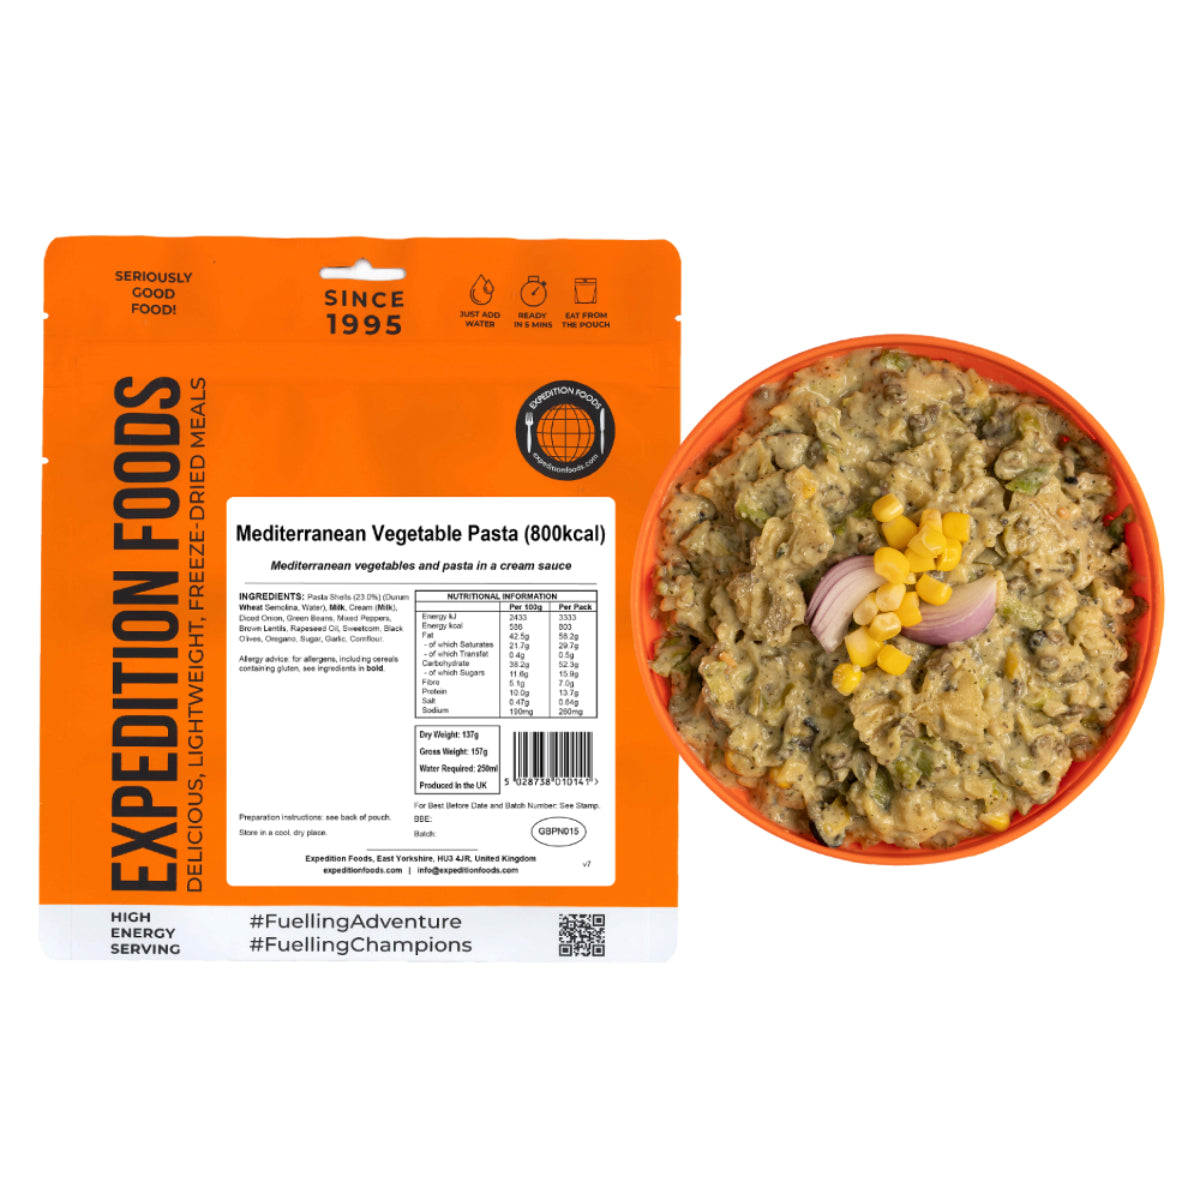 Expedition Foods Mediterranean Vegetable Pasta (800kcal), in pack